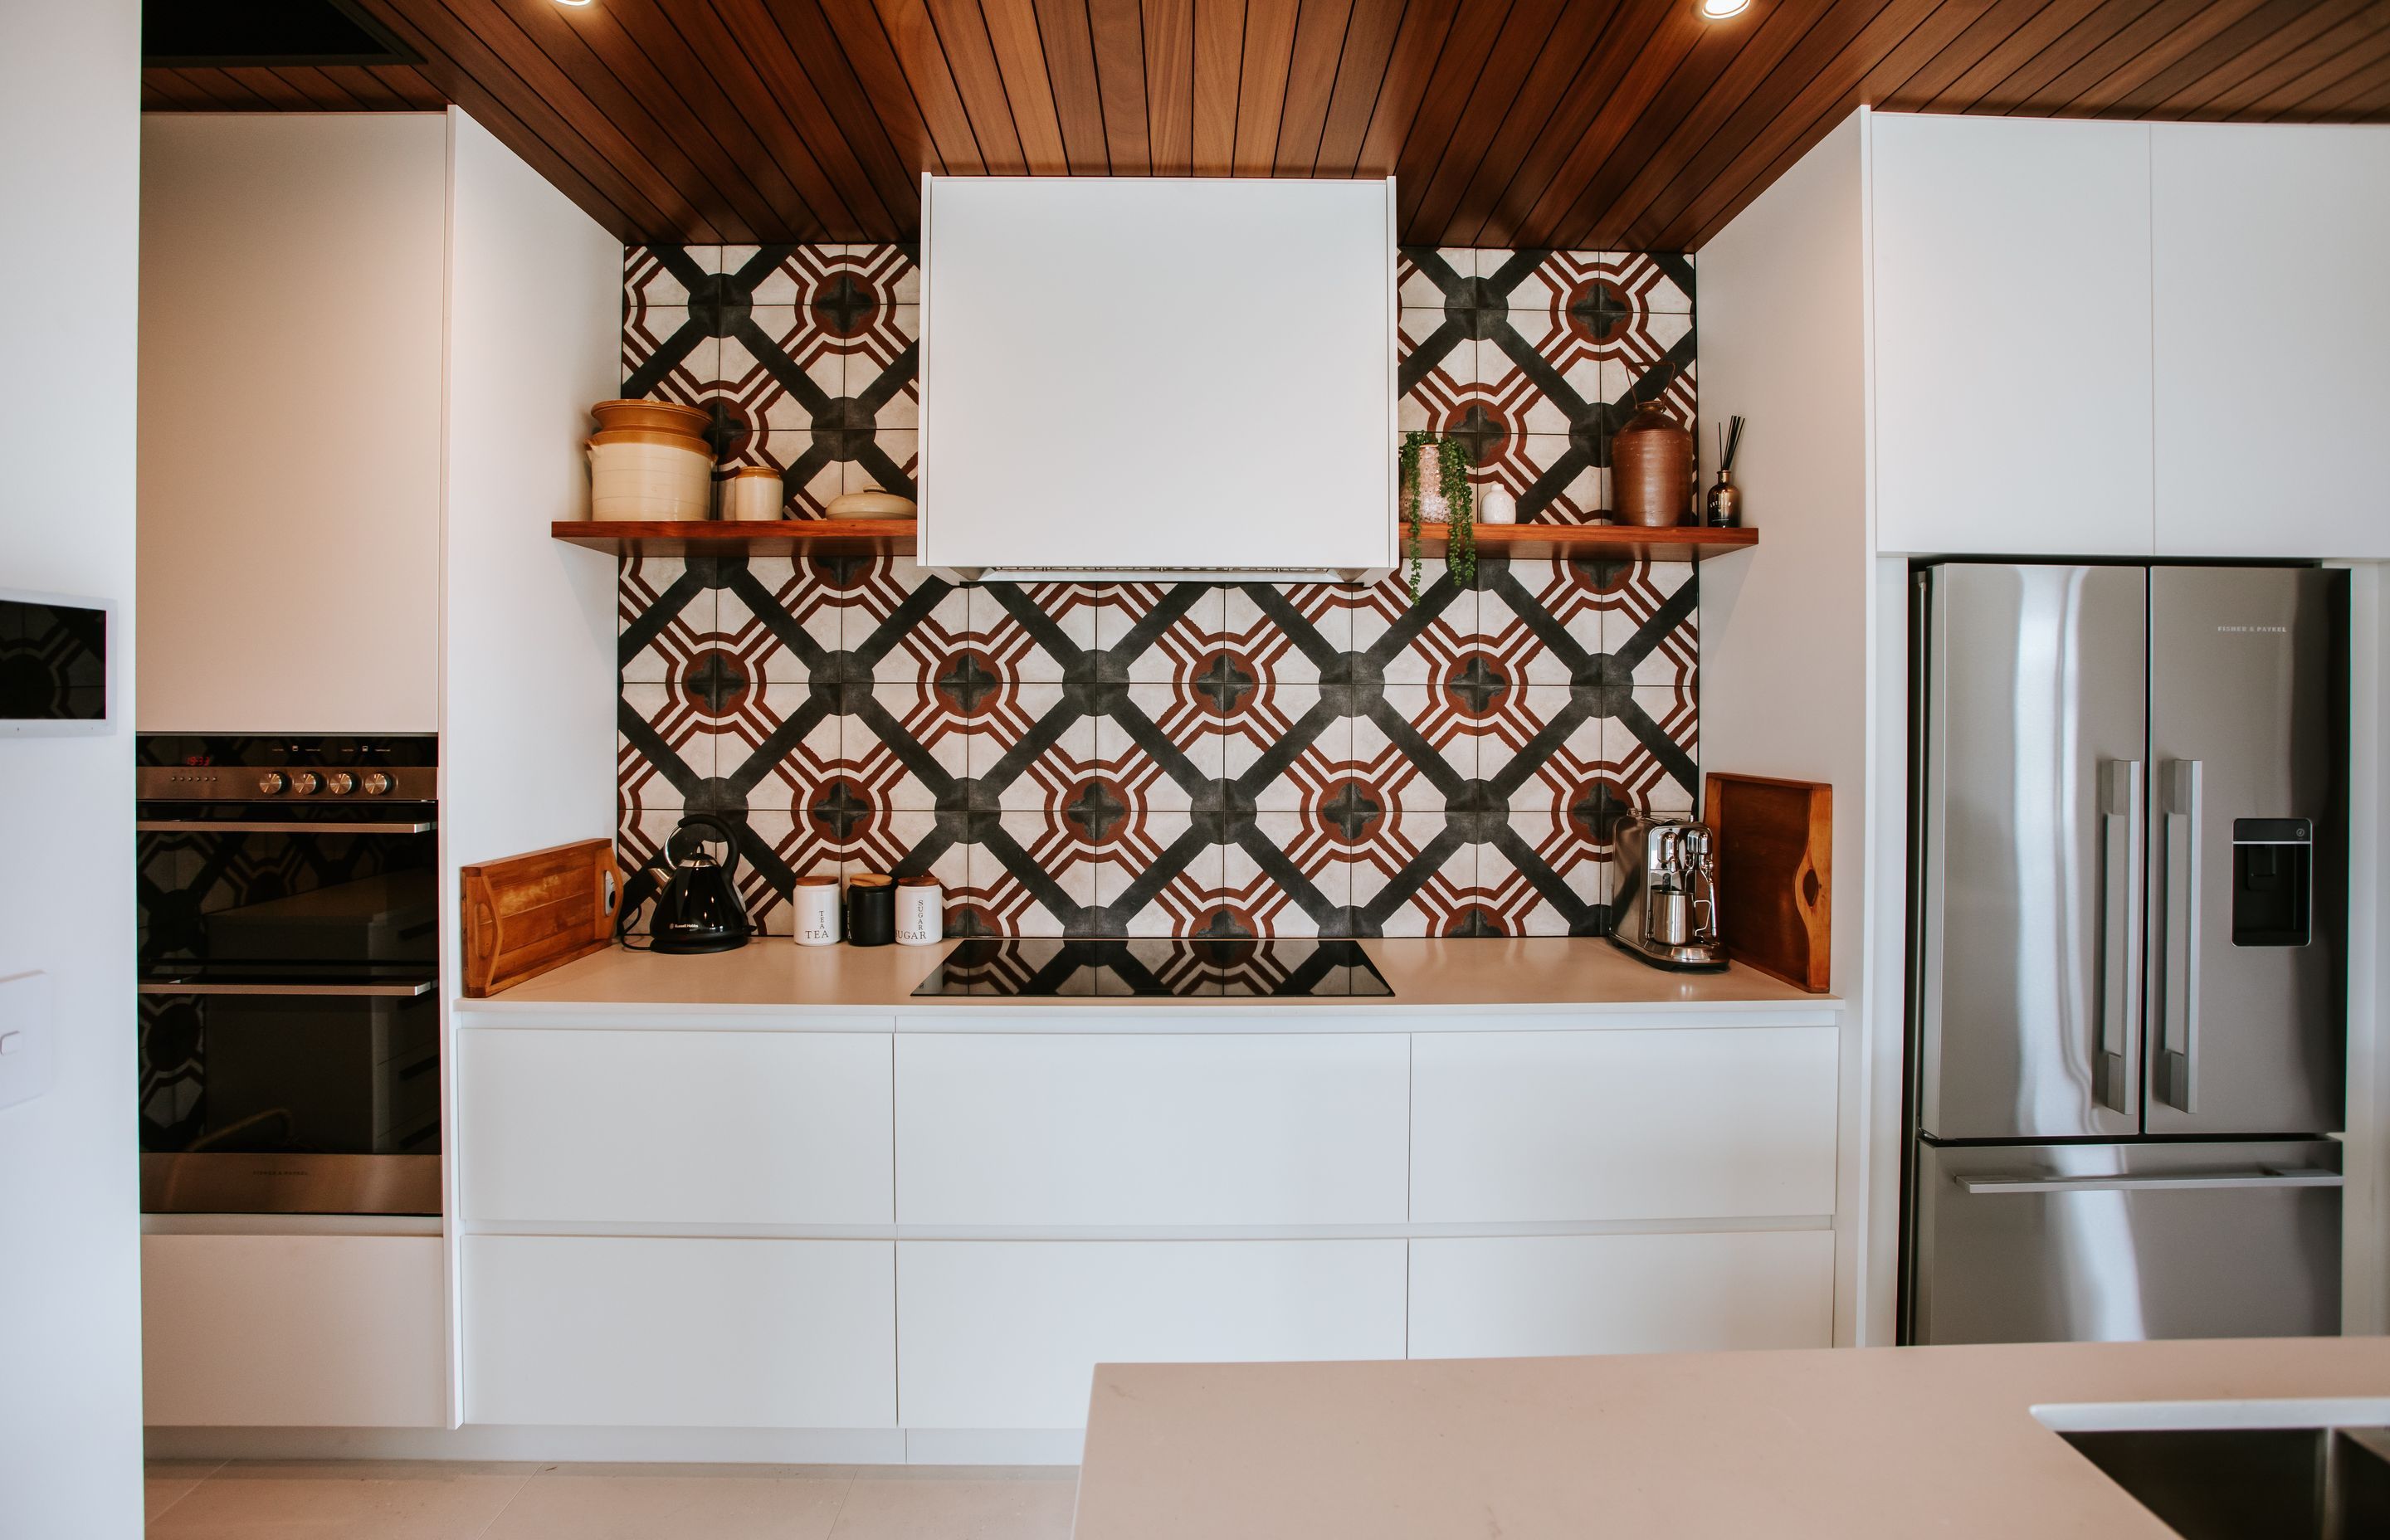 The kitchen features a timber ceiling that delineates the space and combined with the highly patterned tile splashback, the materials create a warm and textured feel.